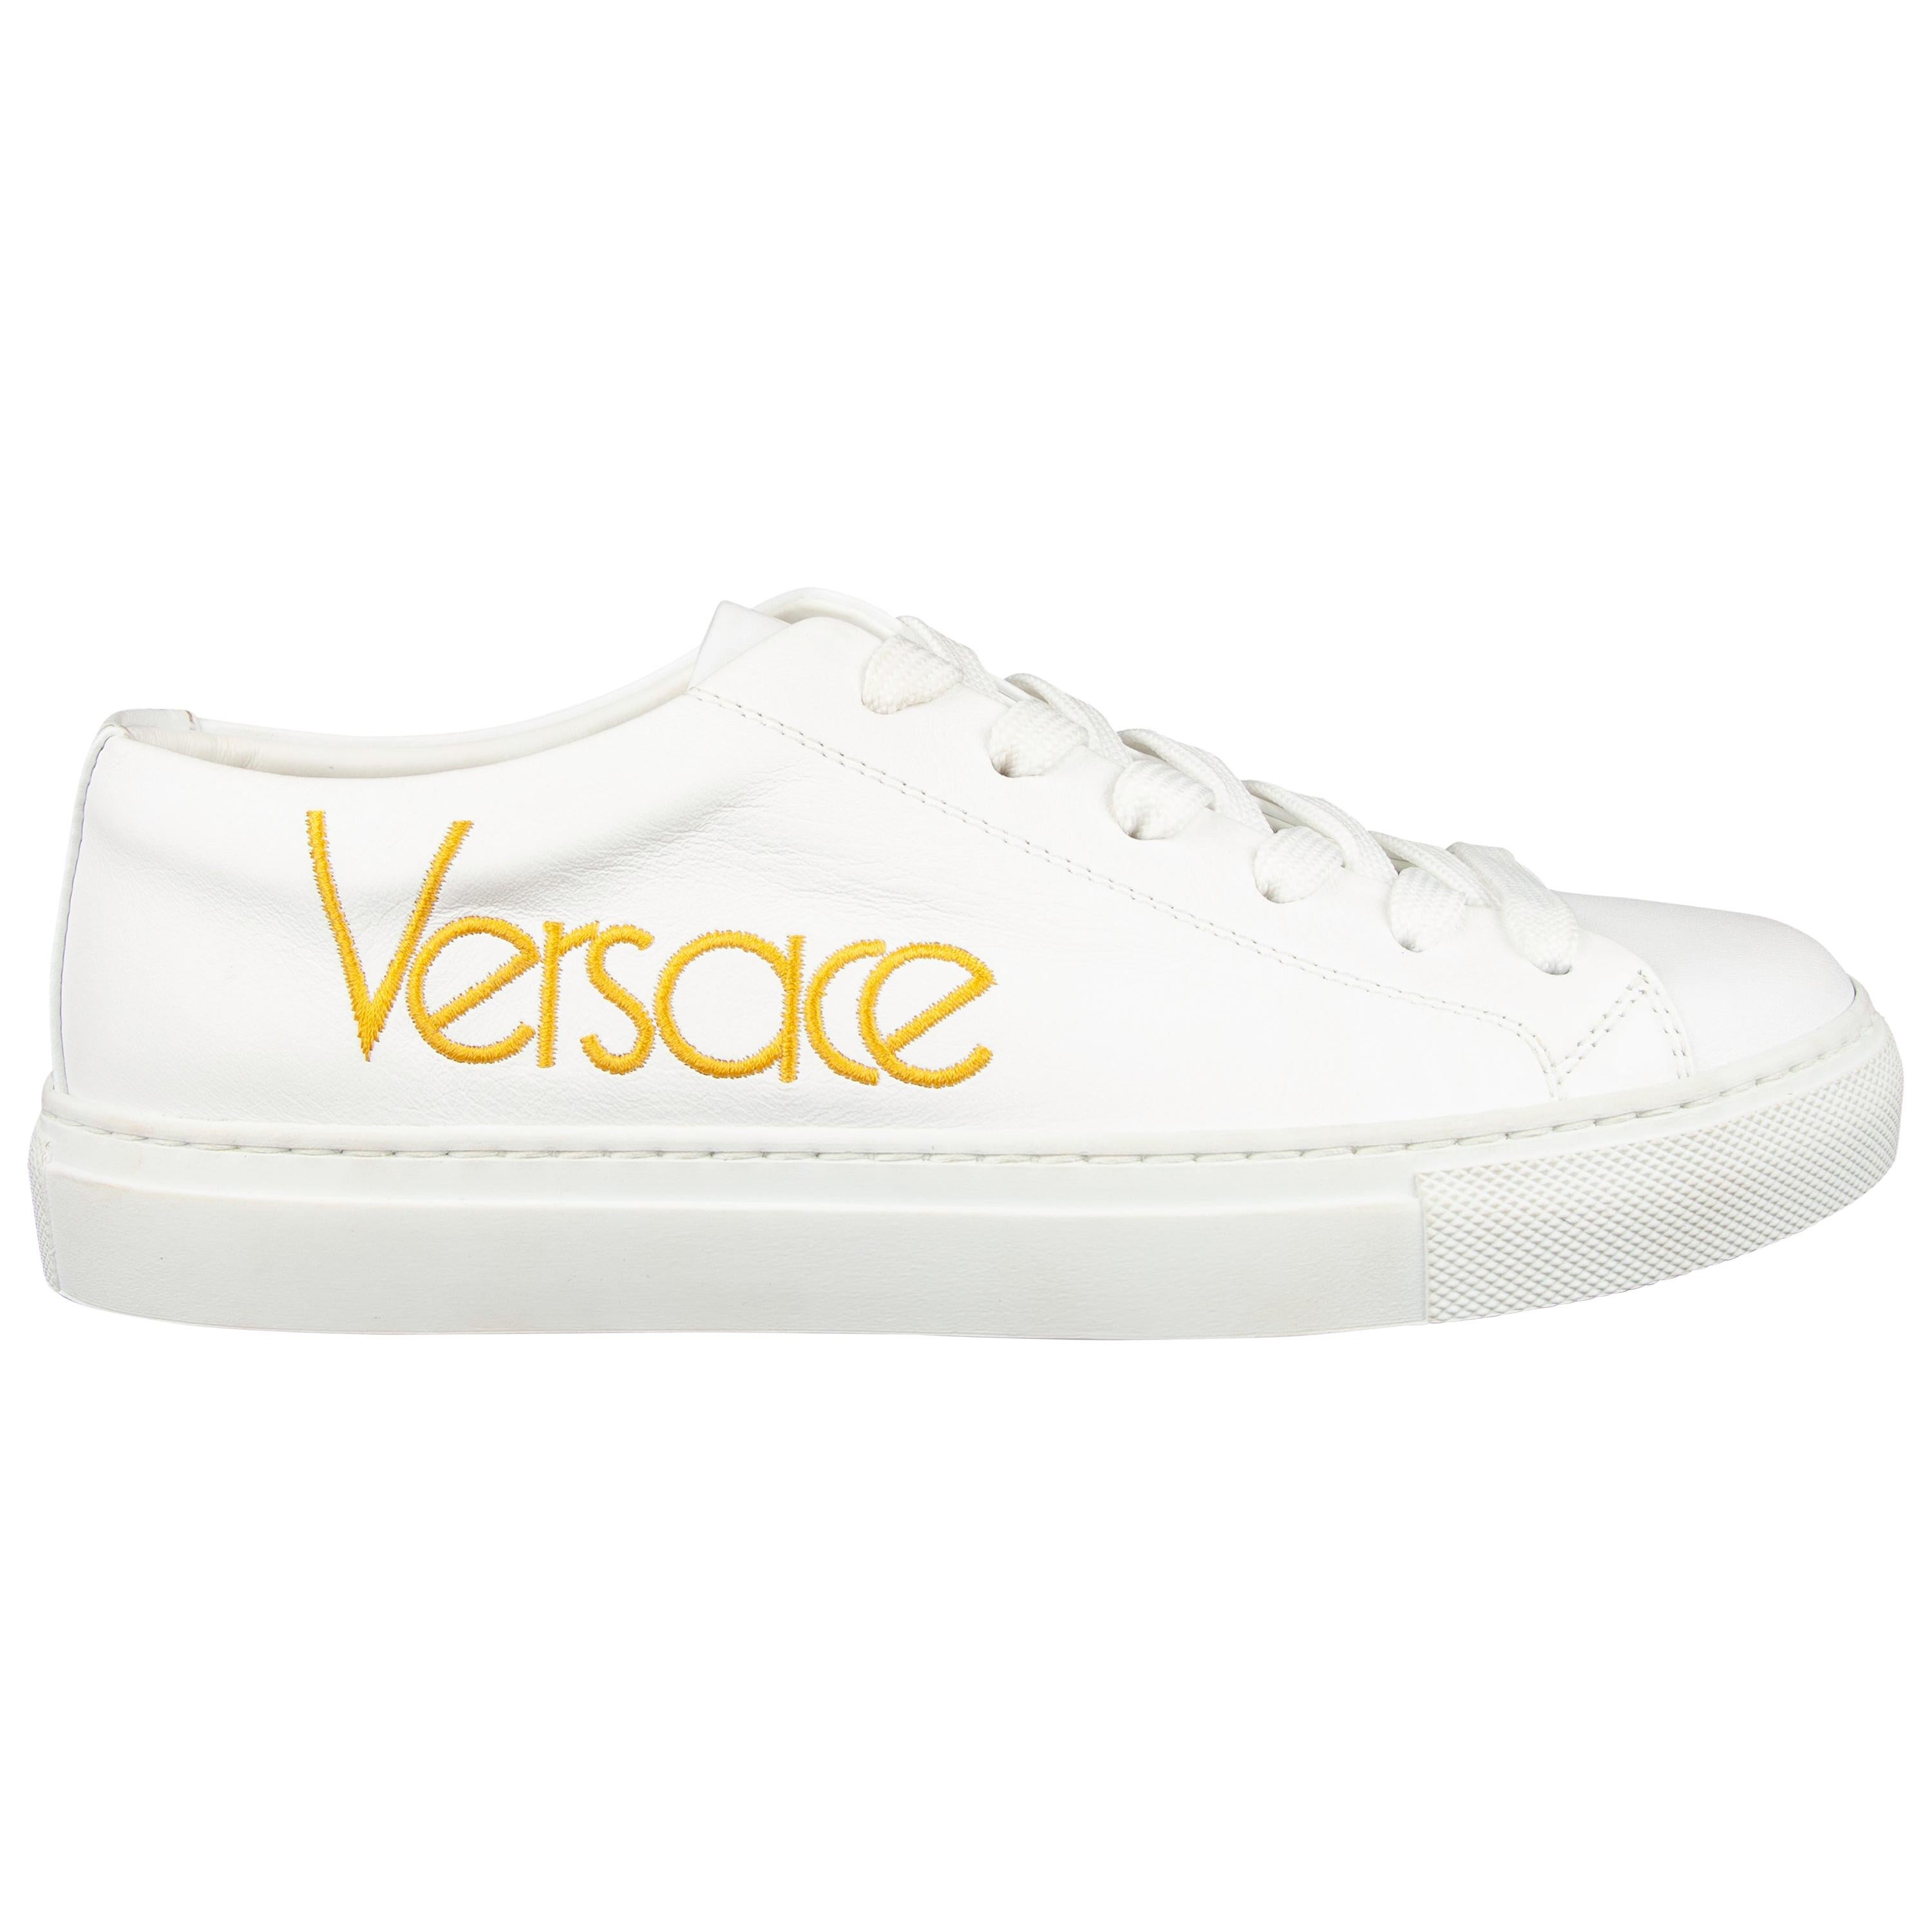 Versace White Leather Sneaker with Vintage Logo Embroidery Size 36